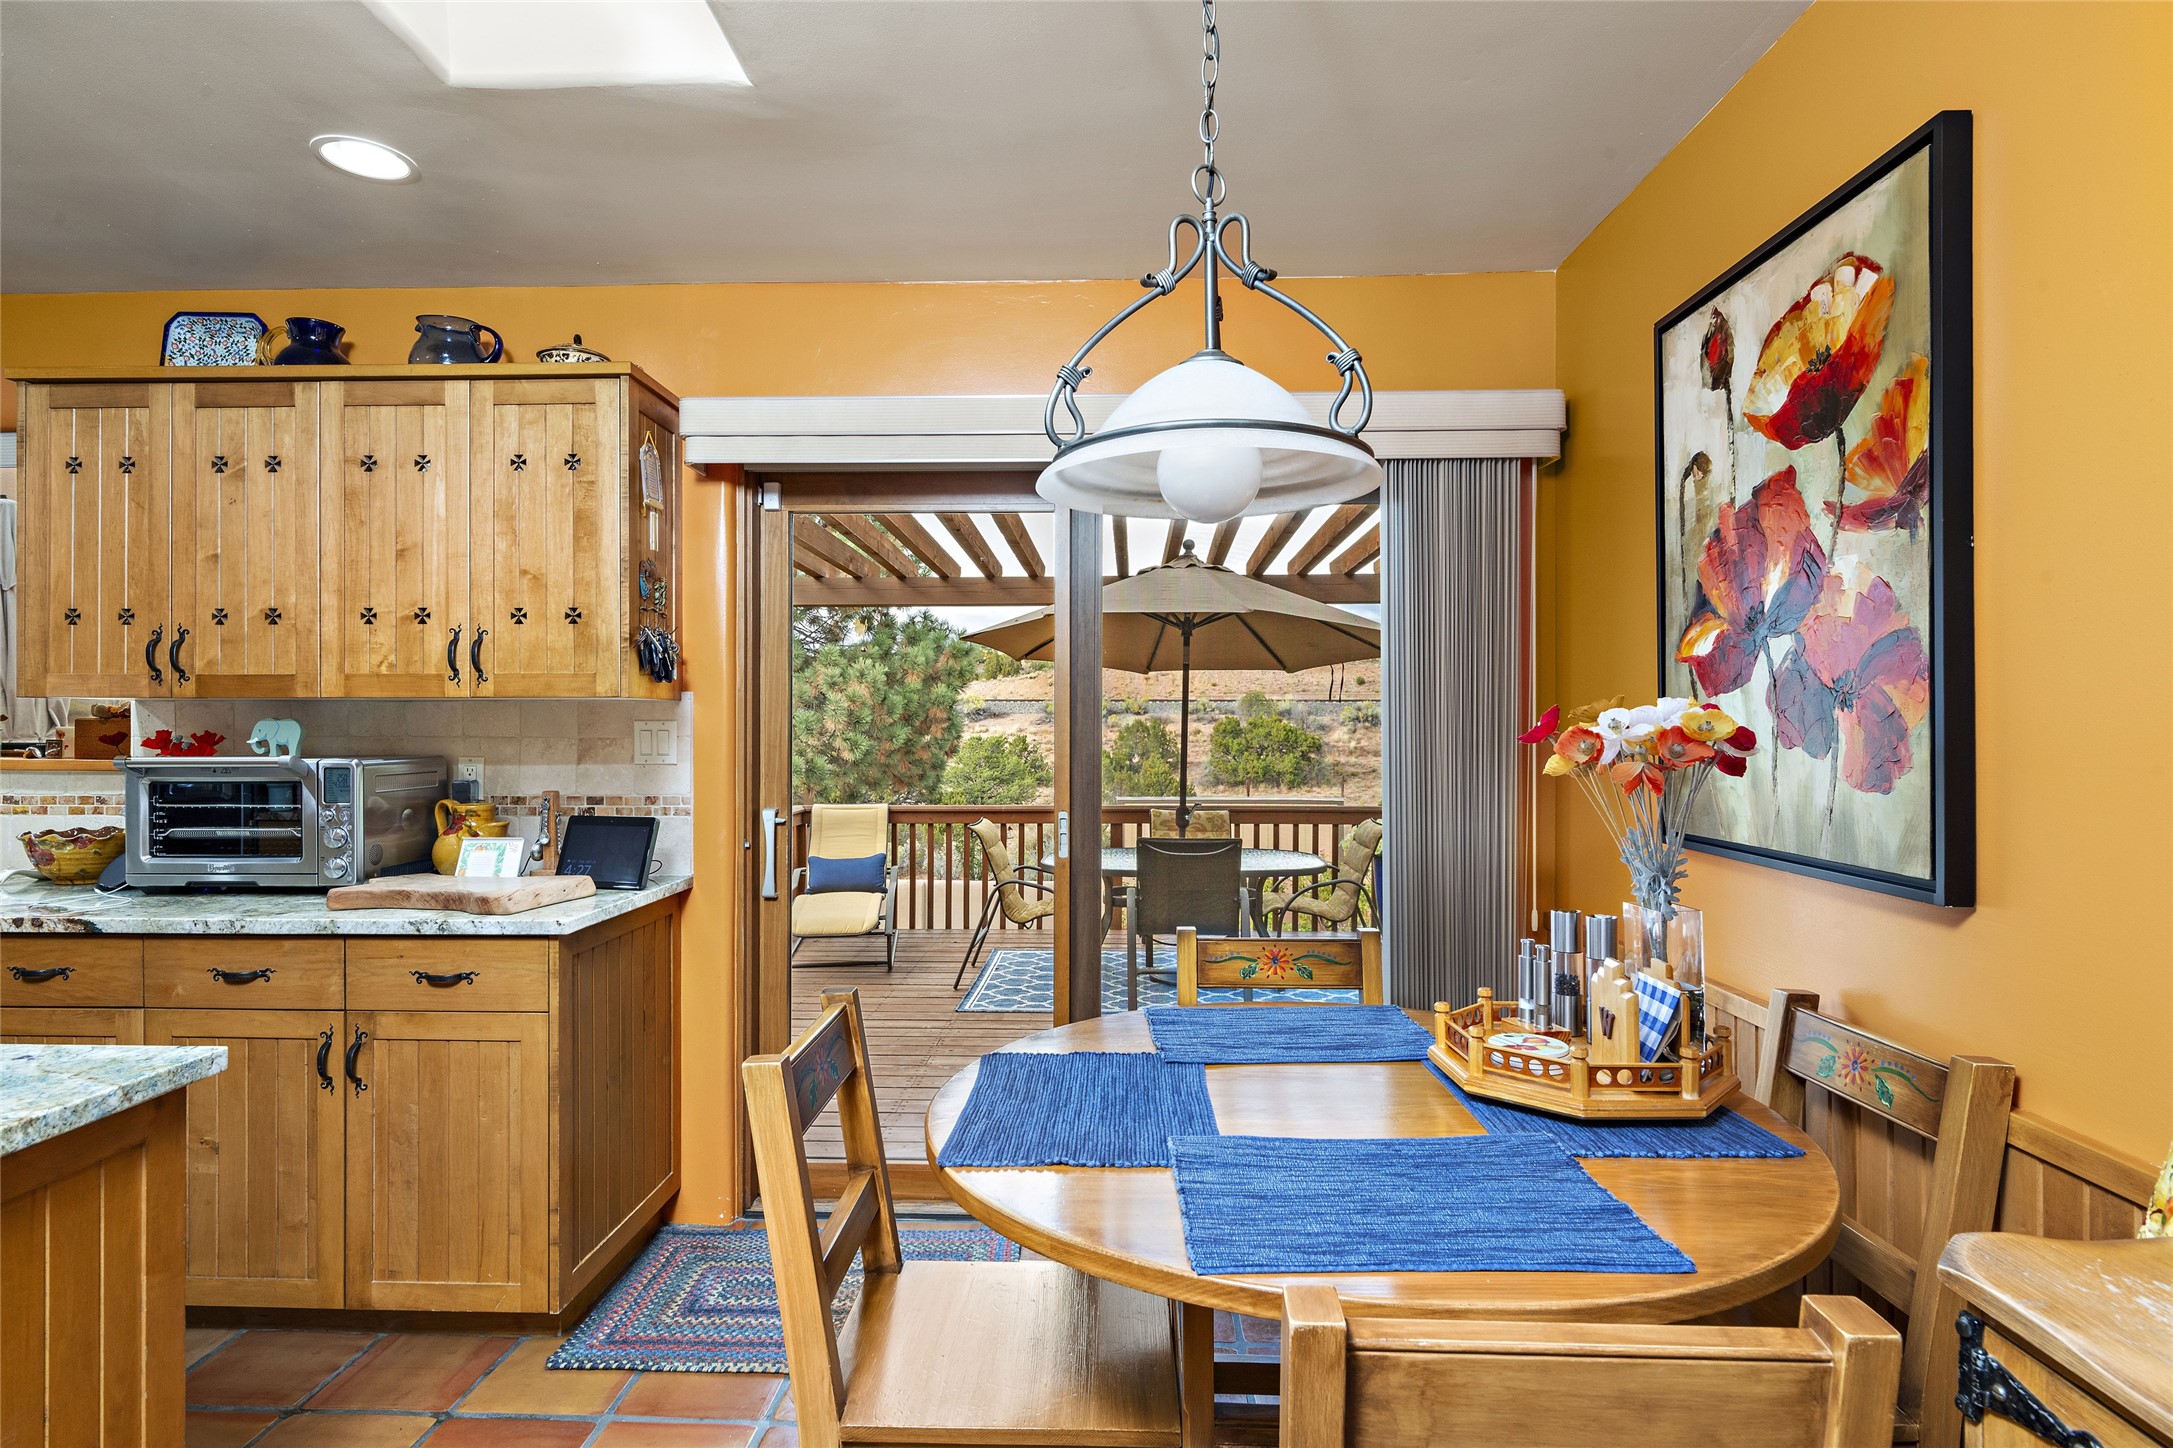 Eat in kitchen area with view out to deck overlooking the backyard